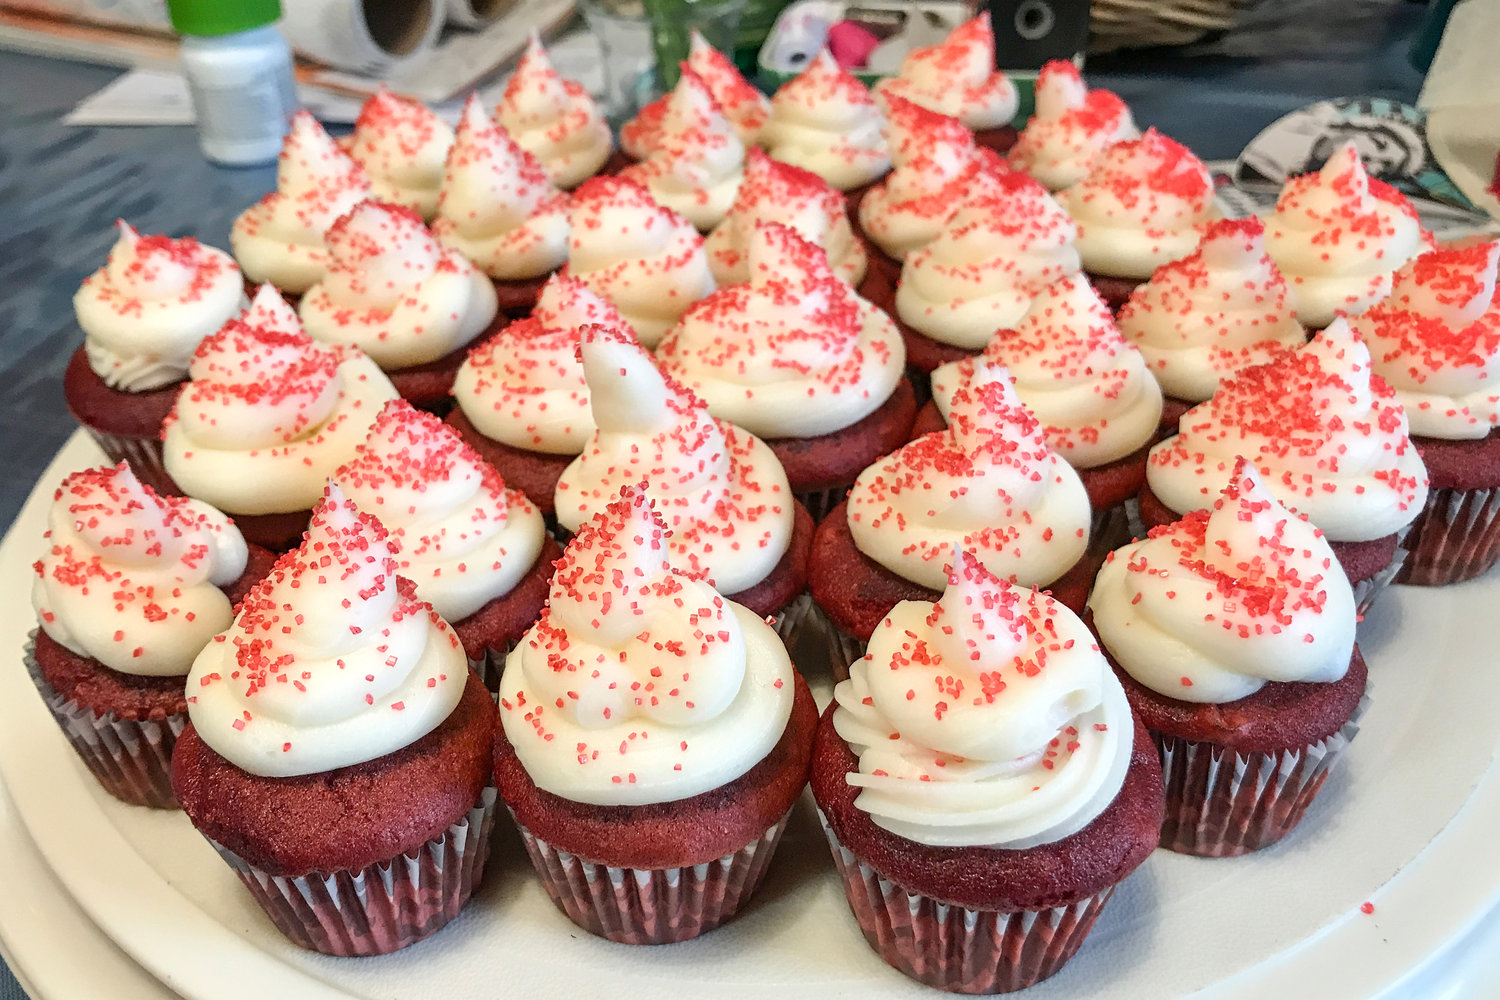 Little Lamb Cupcakes’ most popular cupcake is red velvet, which business owner Lucy Kassel decorates with cream cheese icing using her own recipe. She uses her grandmother’s recipes for the majority of her other cakes.